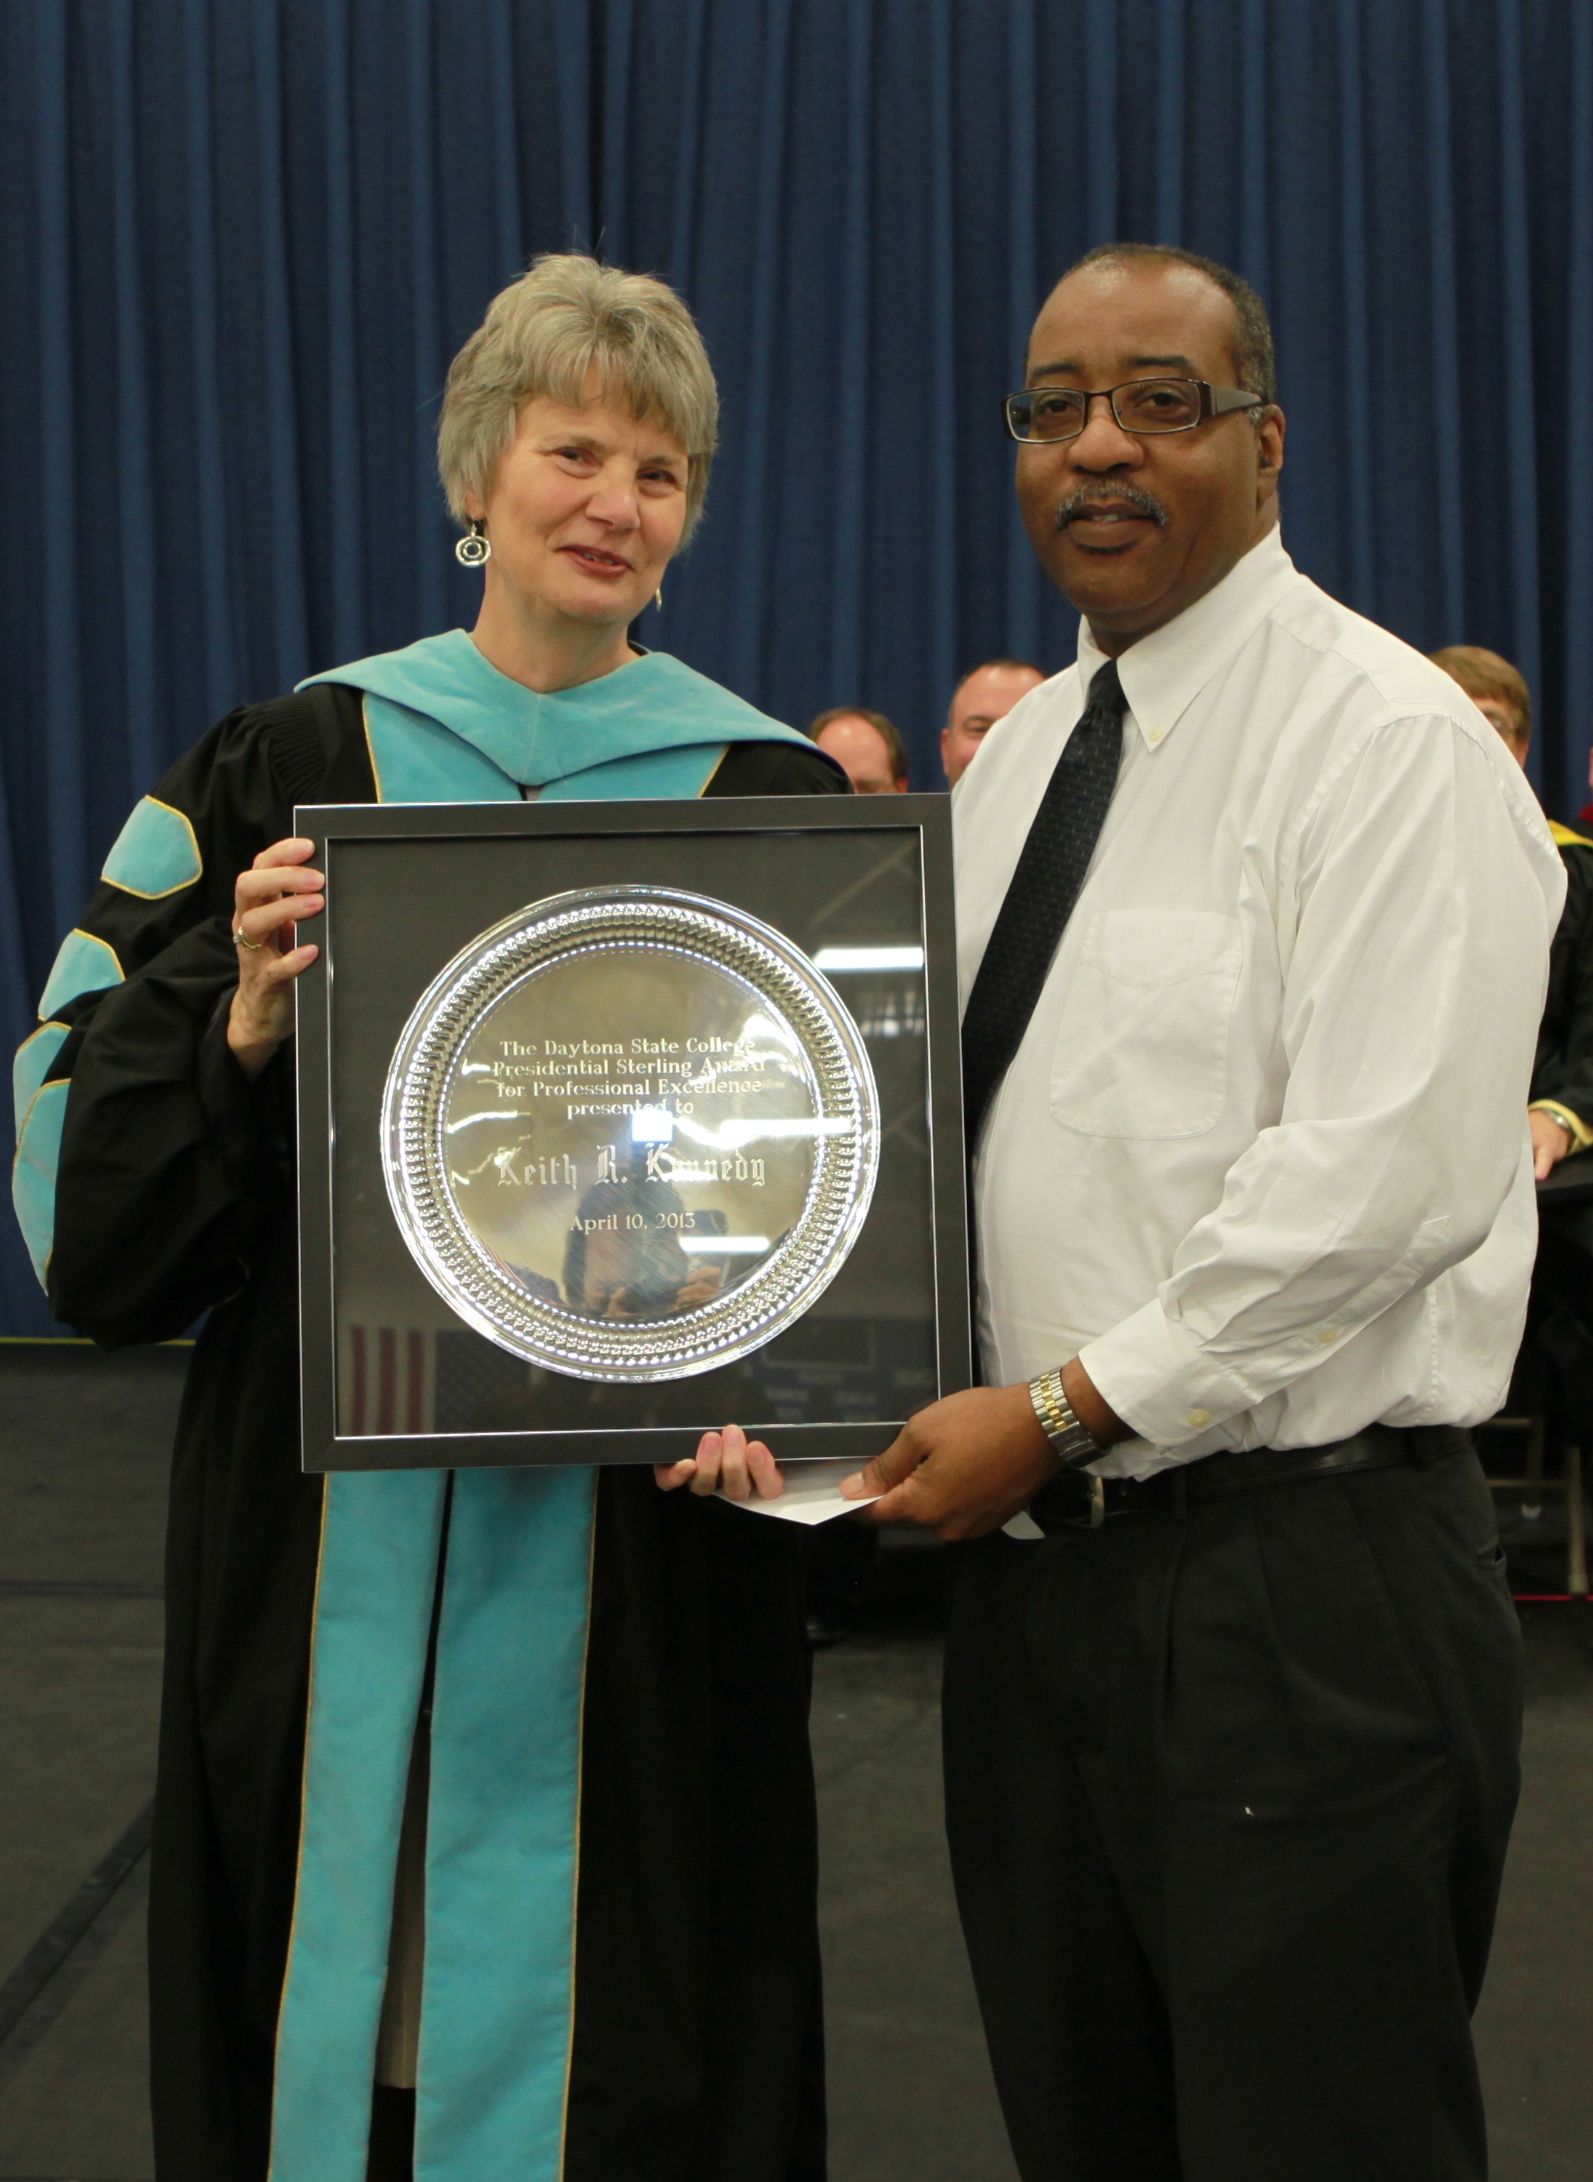 Keith Kennedy, recipient of the 2013 Presidential Sterling Award for Professional Excellence